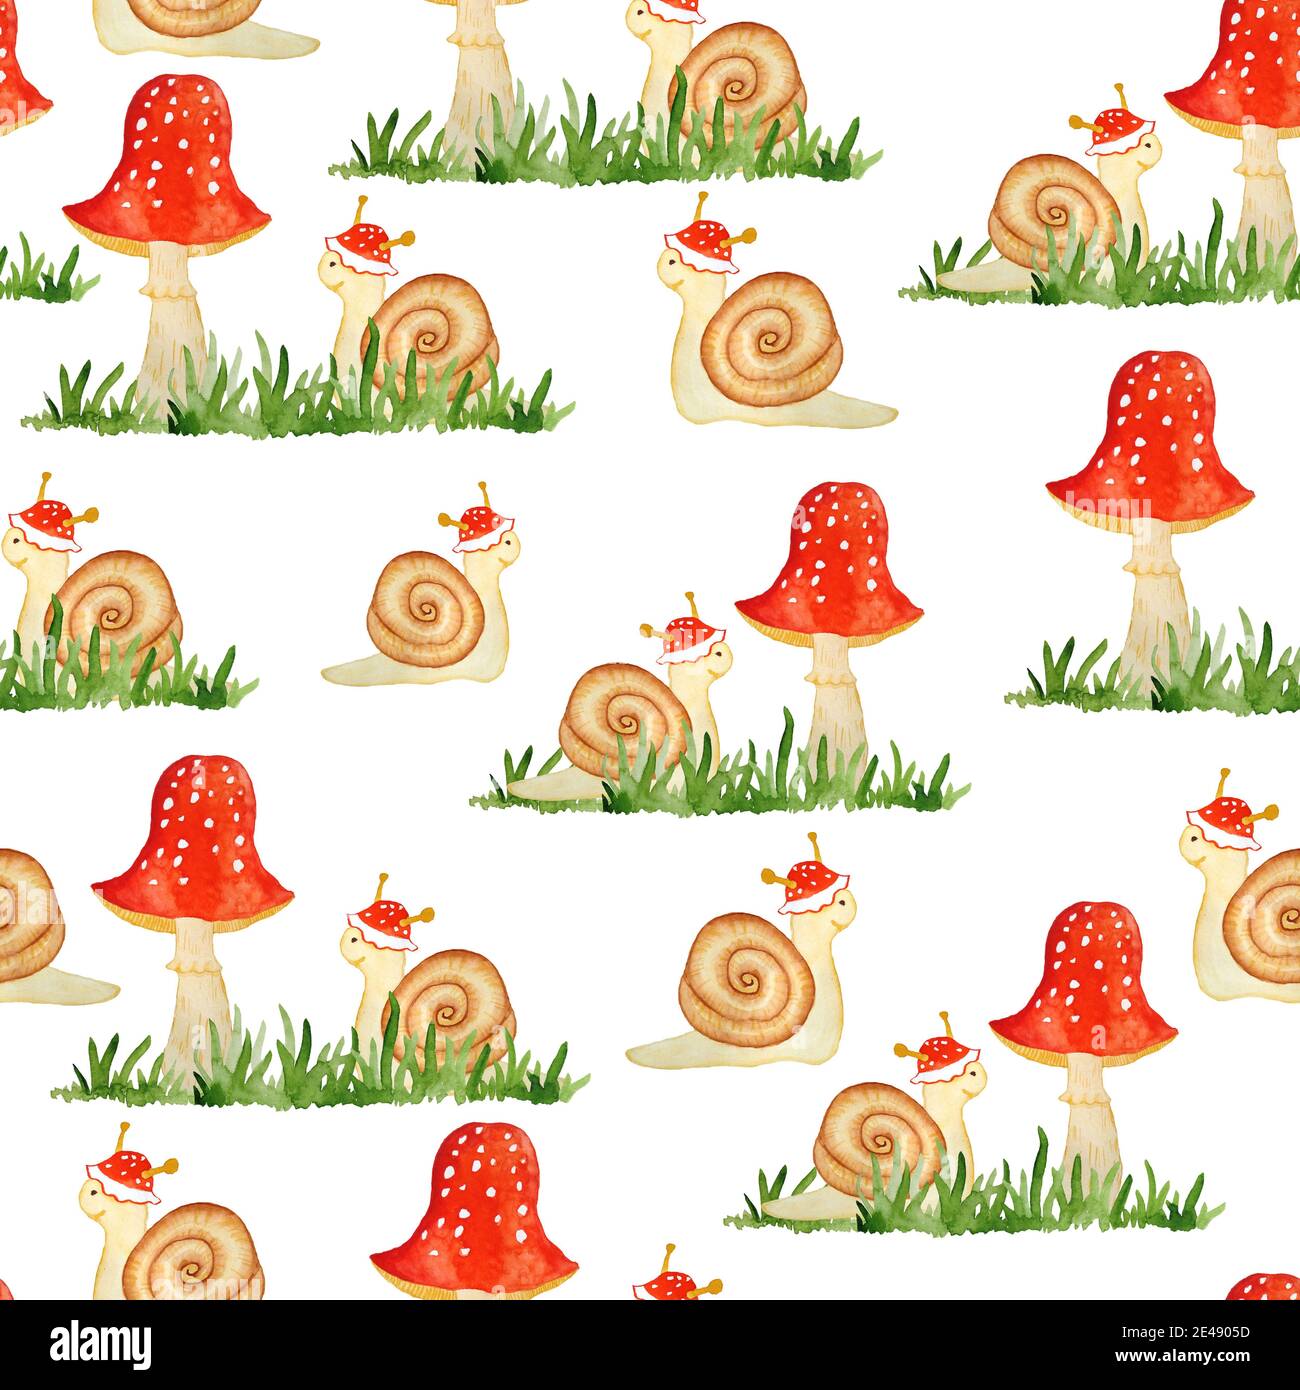 Watercolor hand drawn seamless pattern illustration of amanita muscaria mushrooms with red caps in forest wood woodland green grass and funny cartoon snail. Children textile wallpaper. Nature natural Stock Photo